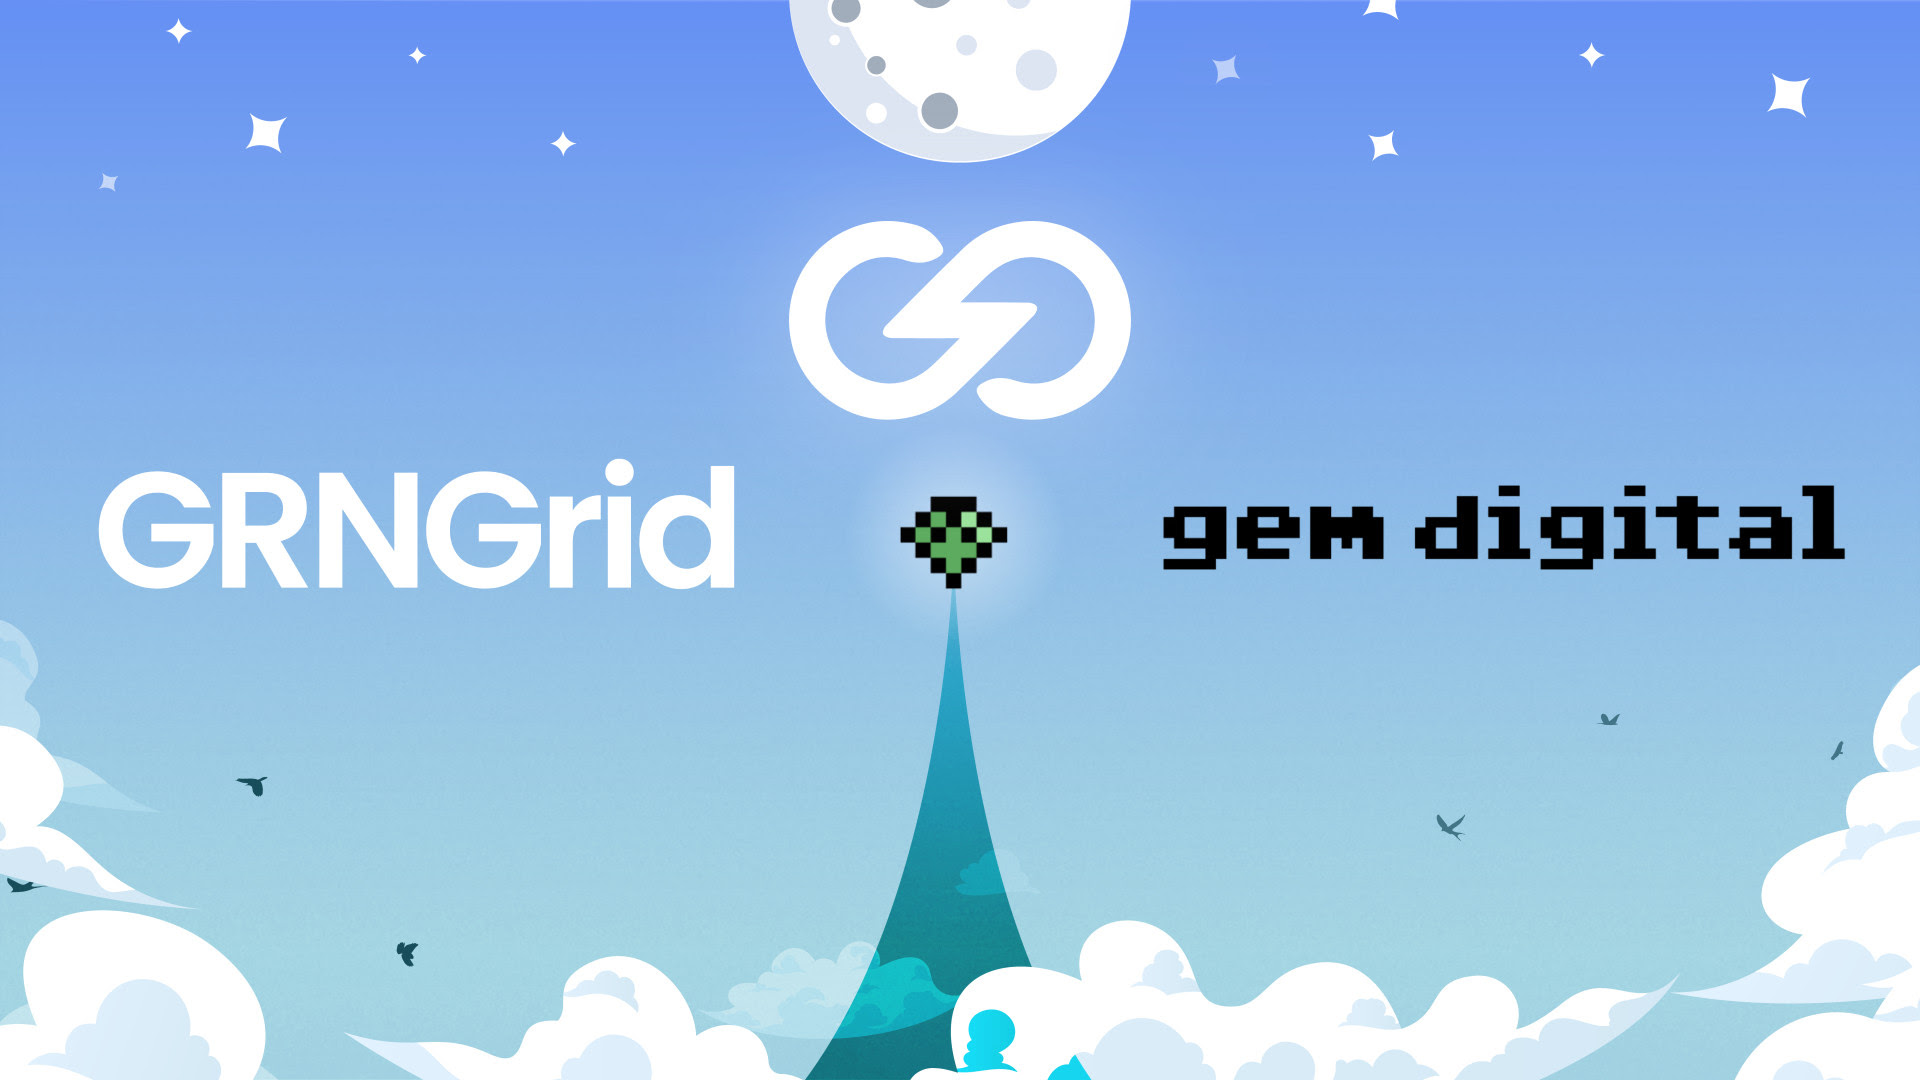 Layer 1 Blockchain GRNGrid Secures $50M Investment From GEM Digital